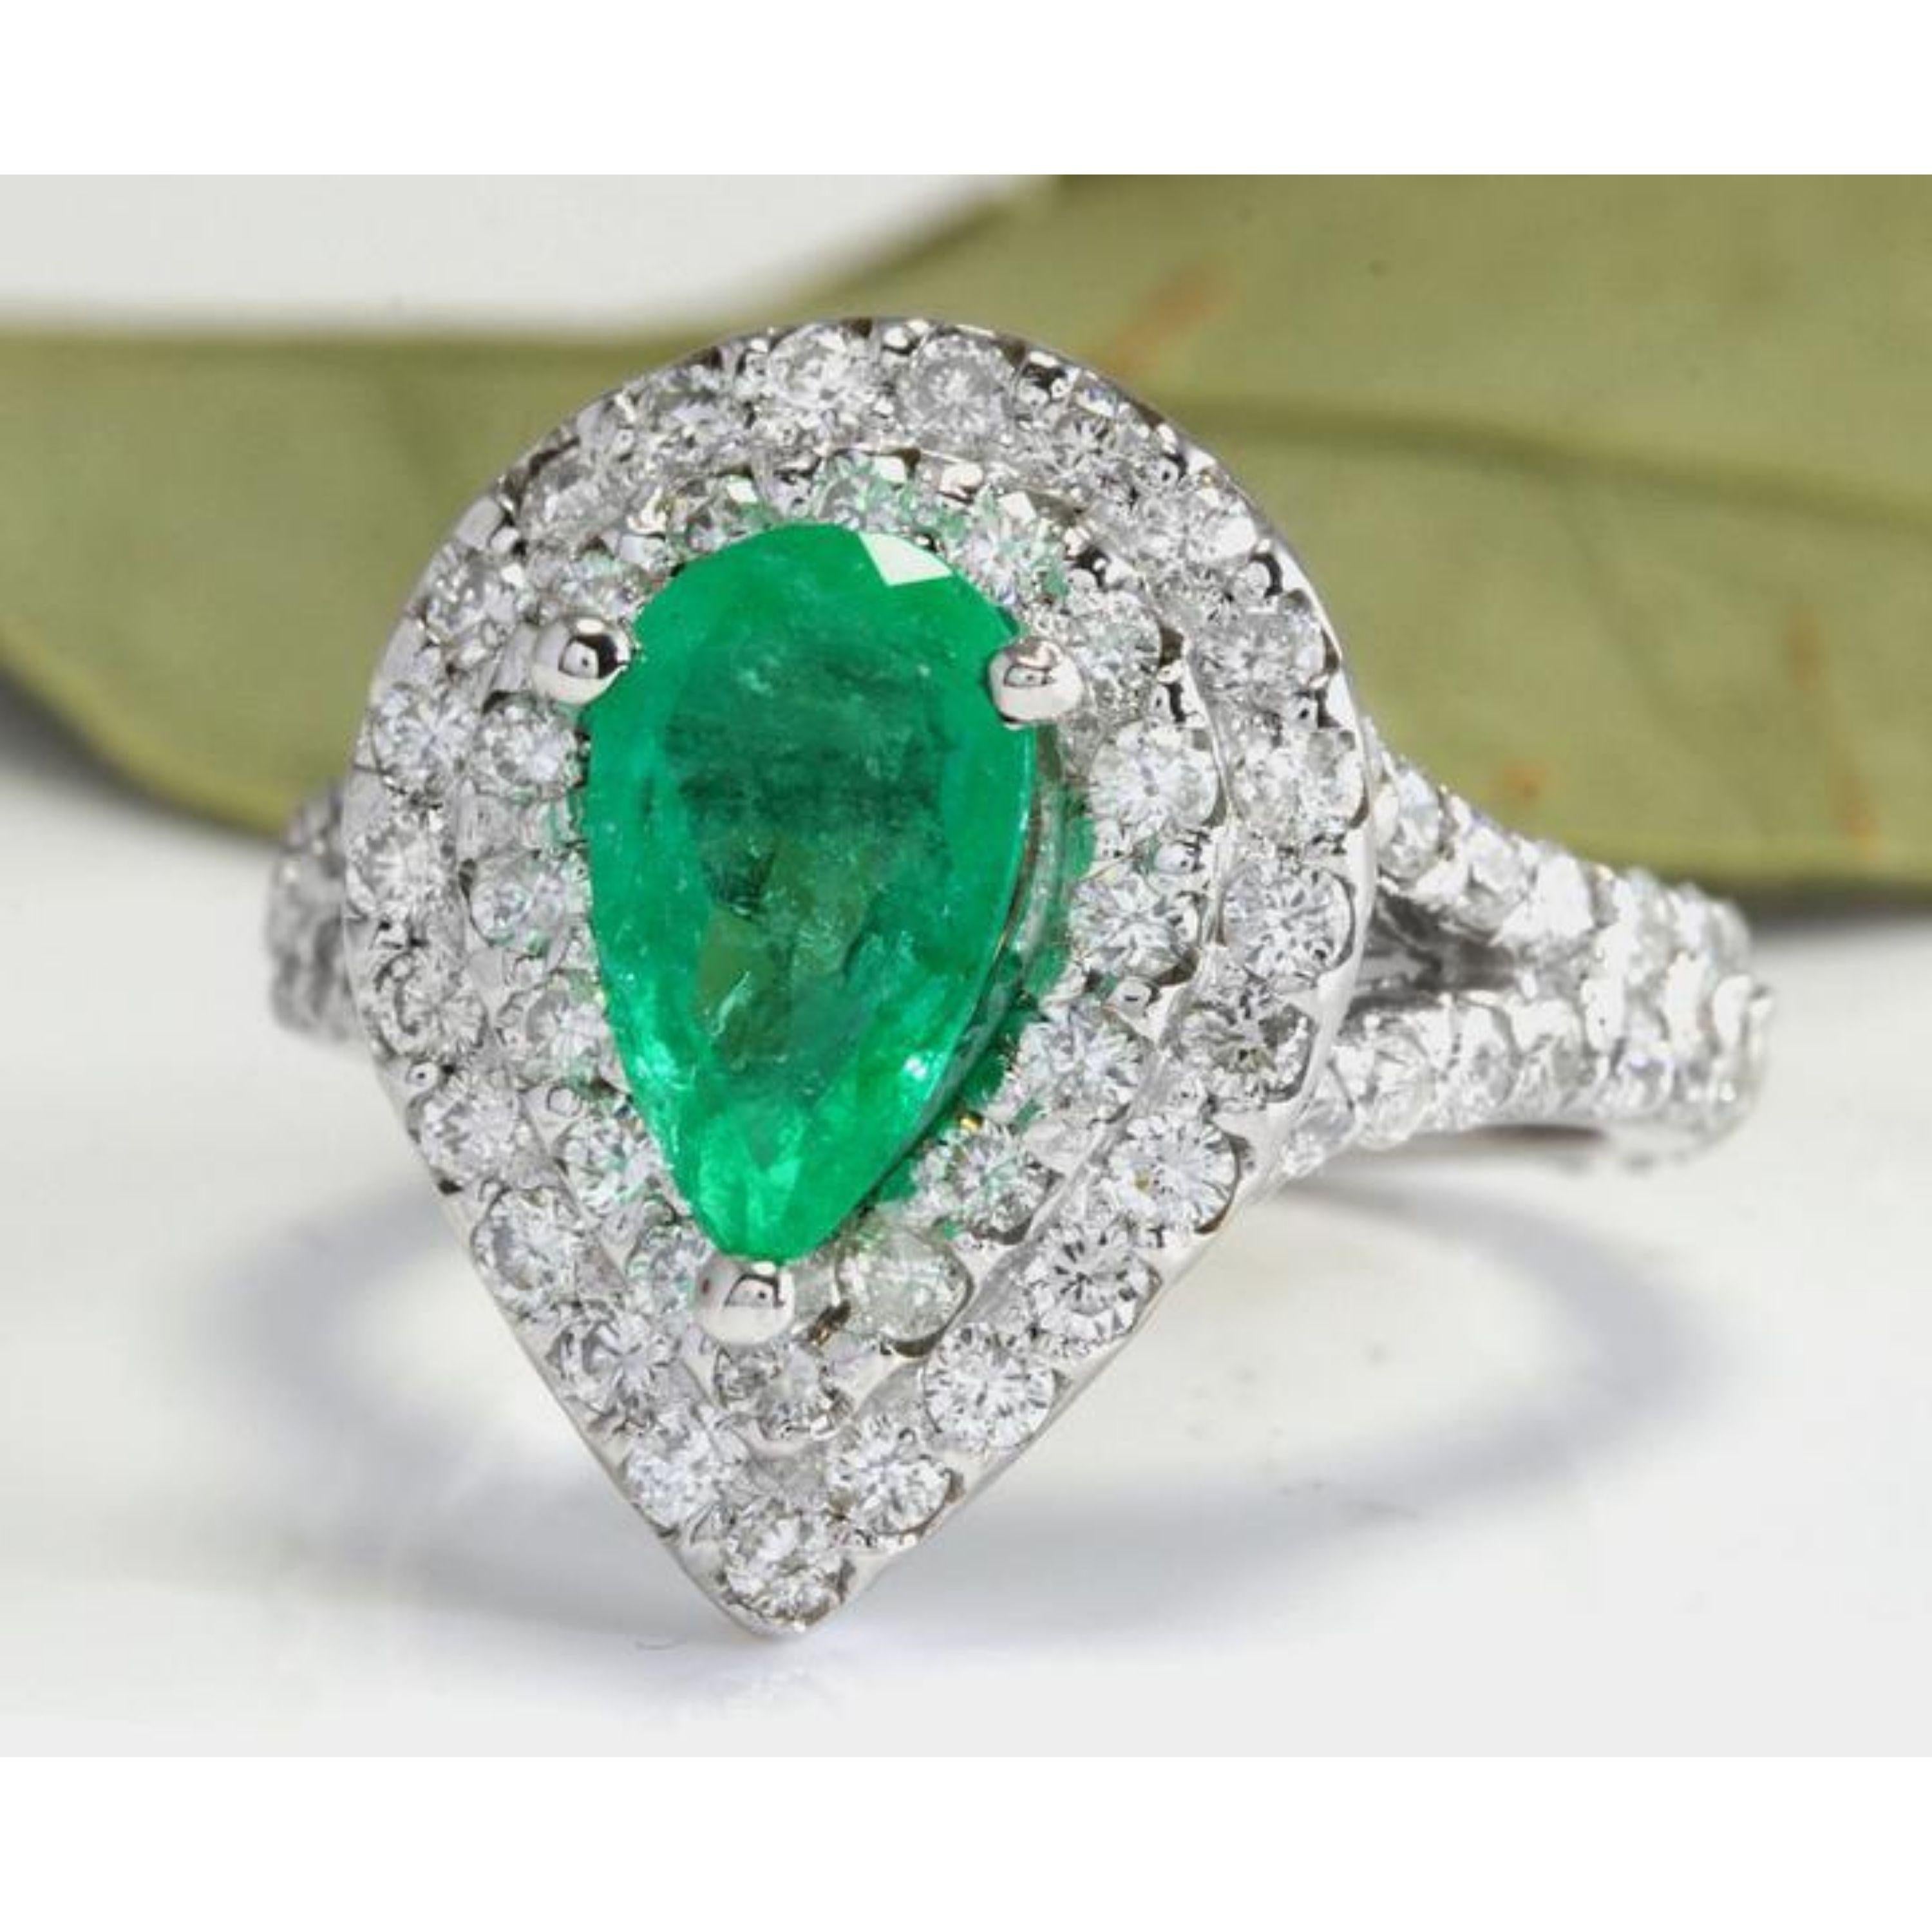 3.50 Carats Natural Colombian Emerald and Diamond 14K Solid White Gold Ring

Total Natural Pear Cut Emerald Weight is: 2.00 Carats (transparent)

Emerald Measures: 9.25 x 6.5mm

Natural Round Diamonds Weight: 1.50 Carats (color G / Clarity